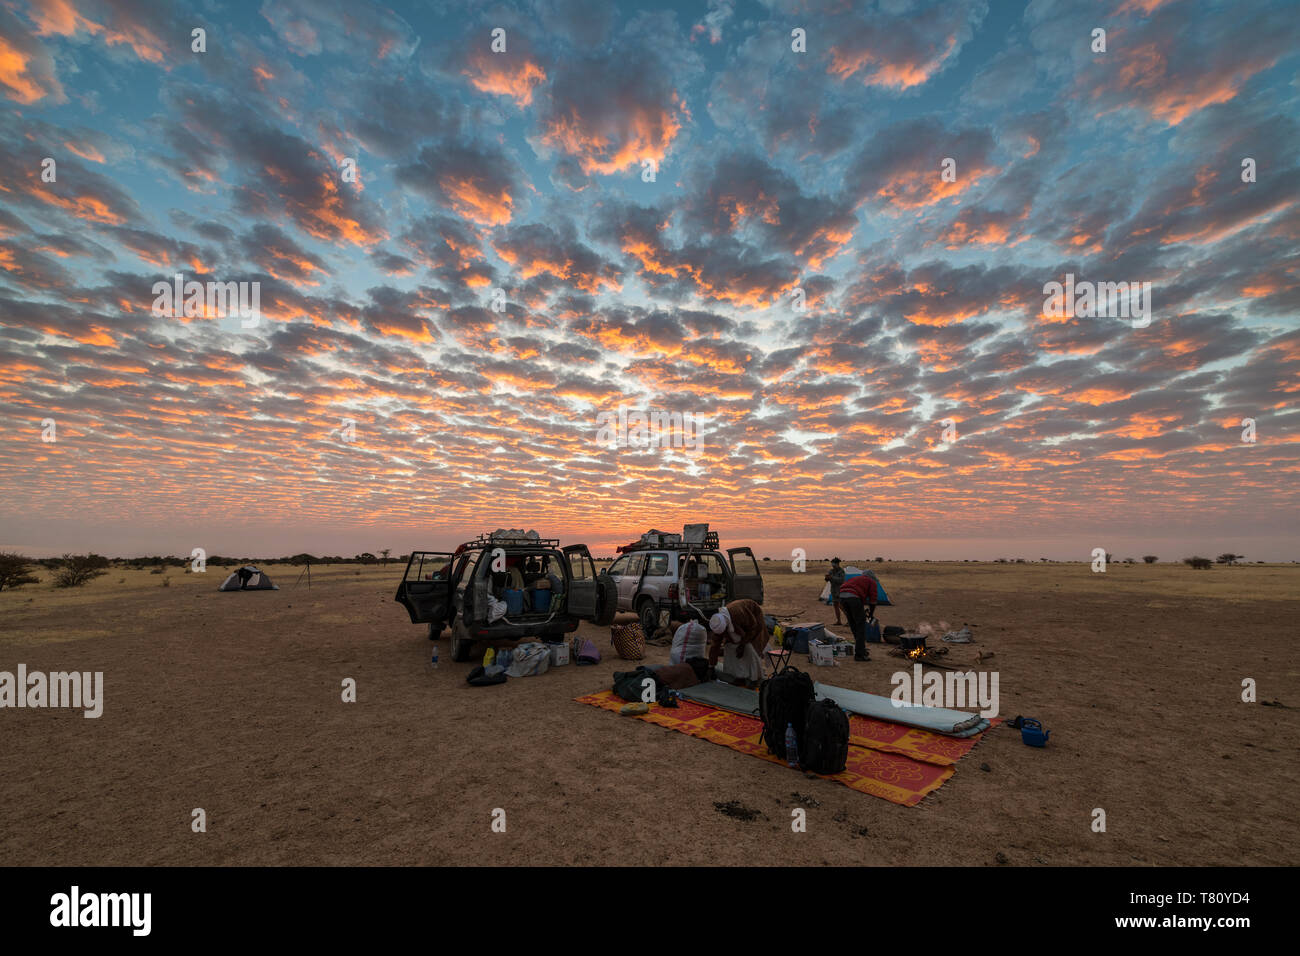 Camping under a dramatic morning sky in the Sahel, Chad, Africa Stock Photo